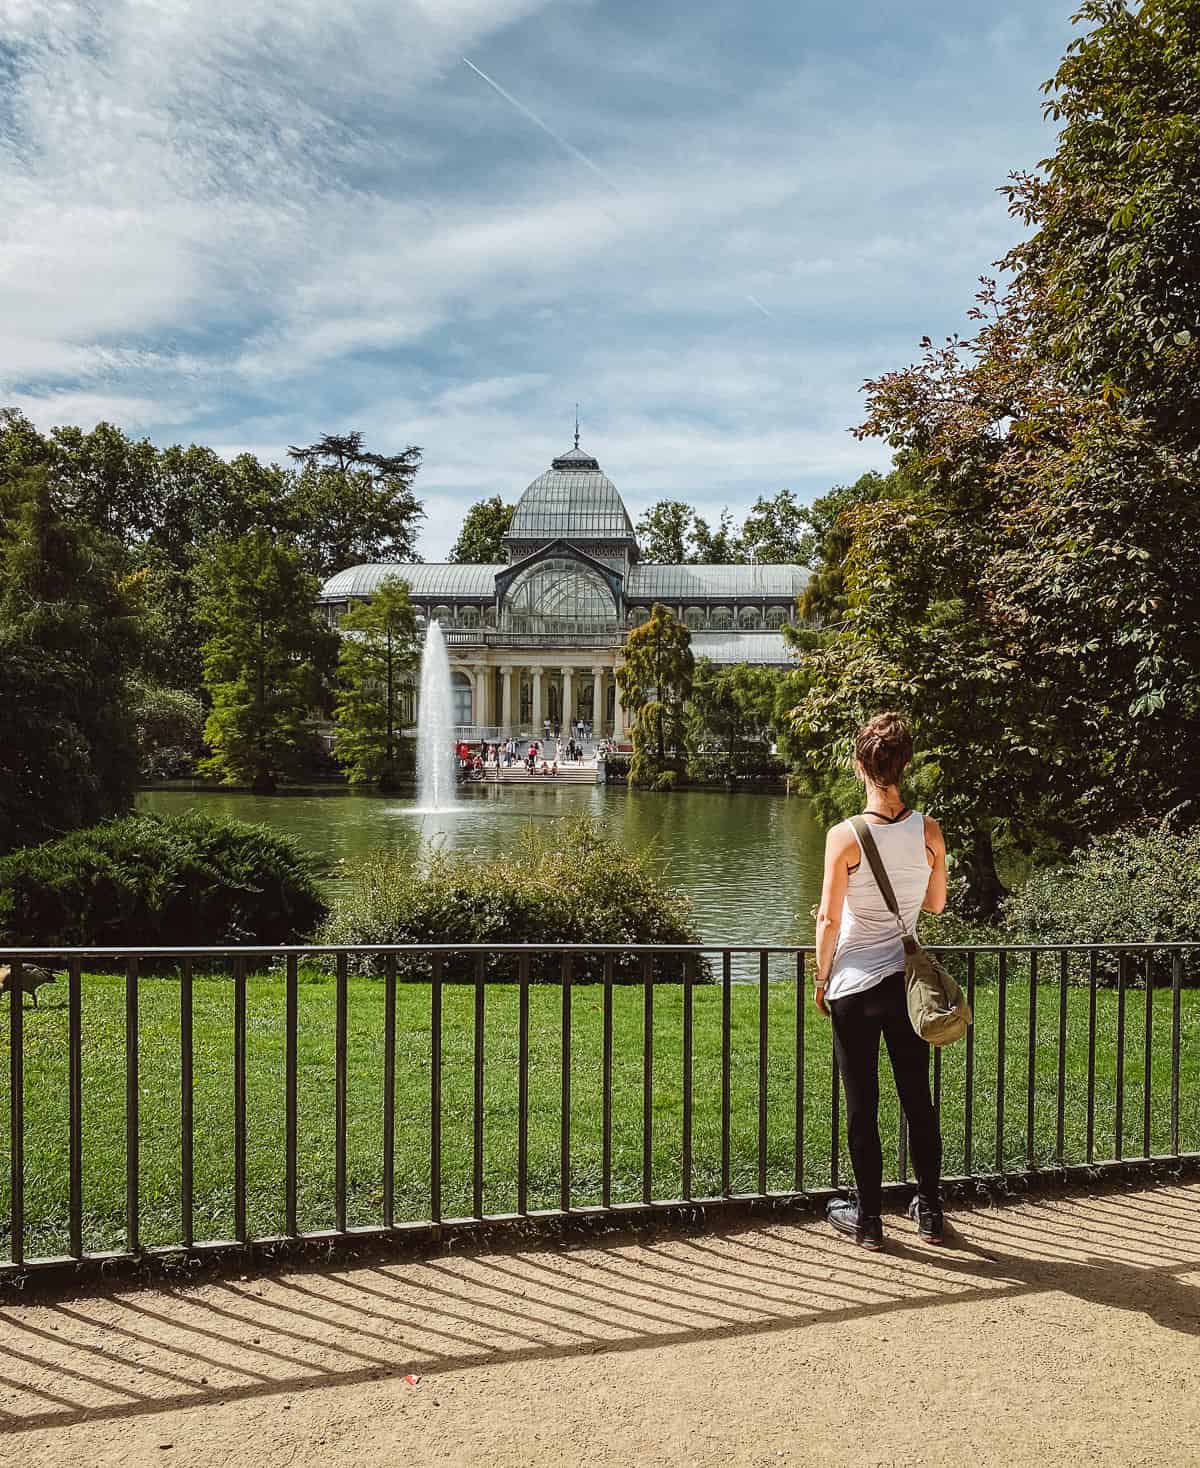 A woman standing in front of a building made of glass in a park